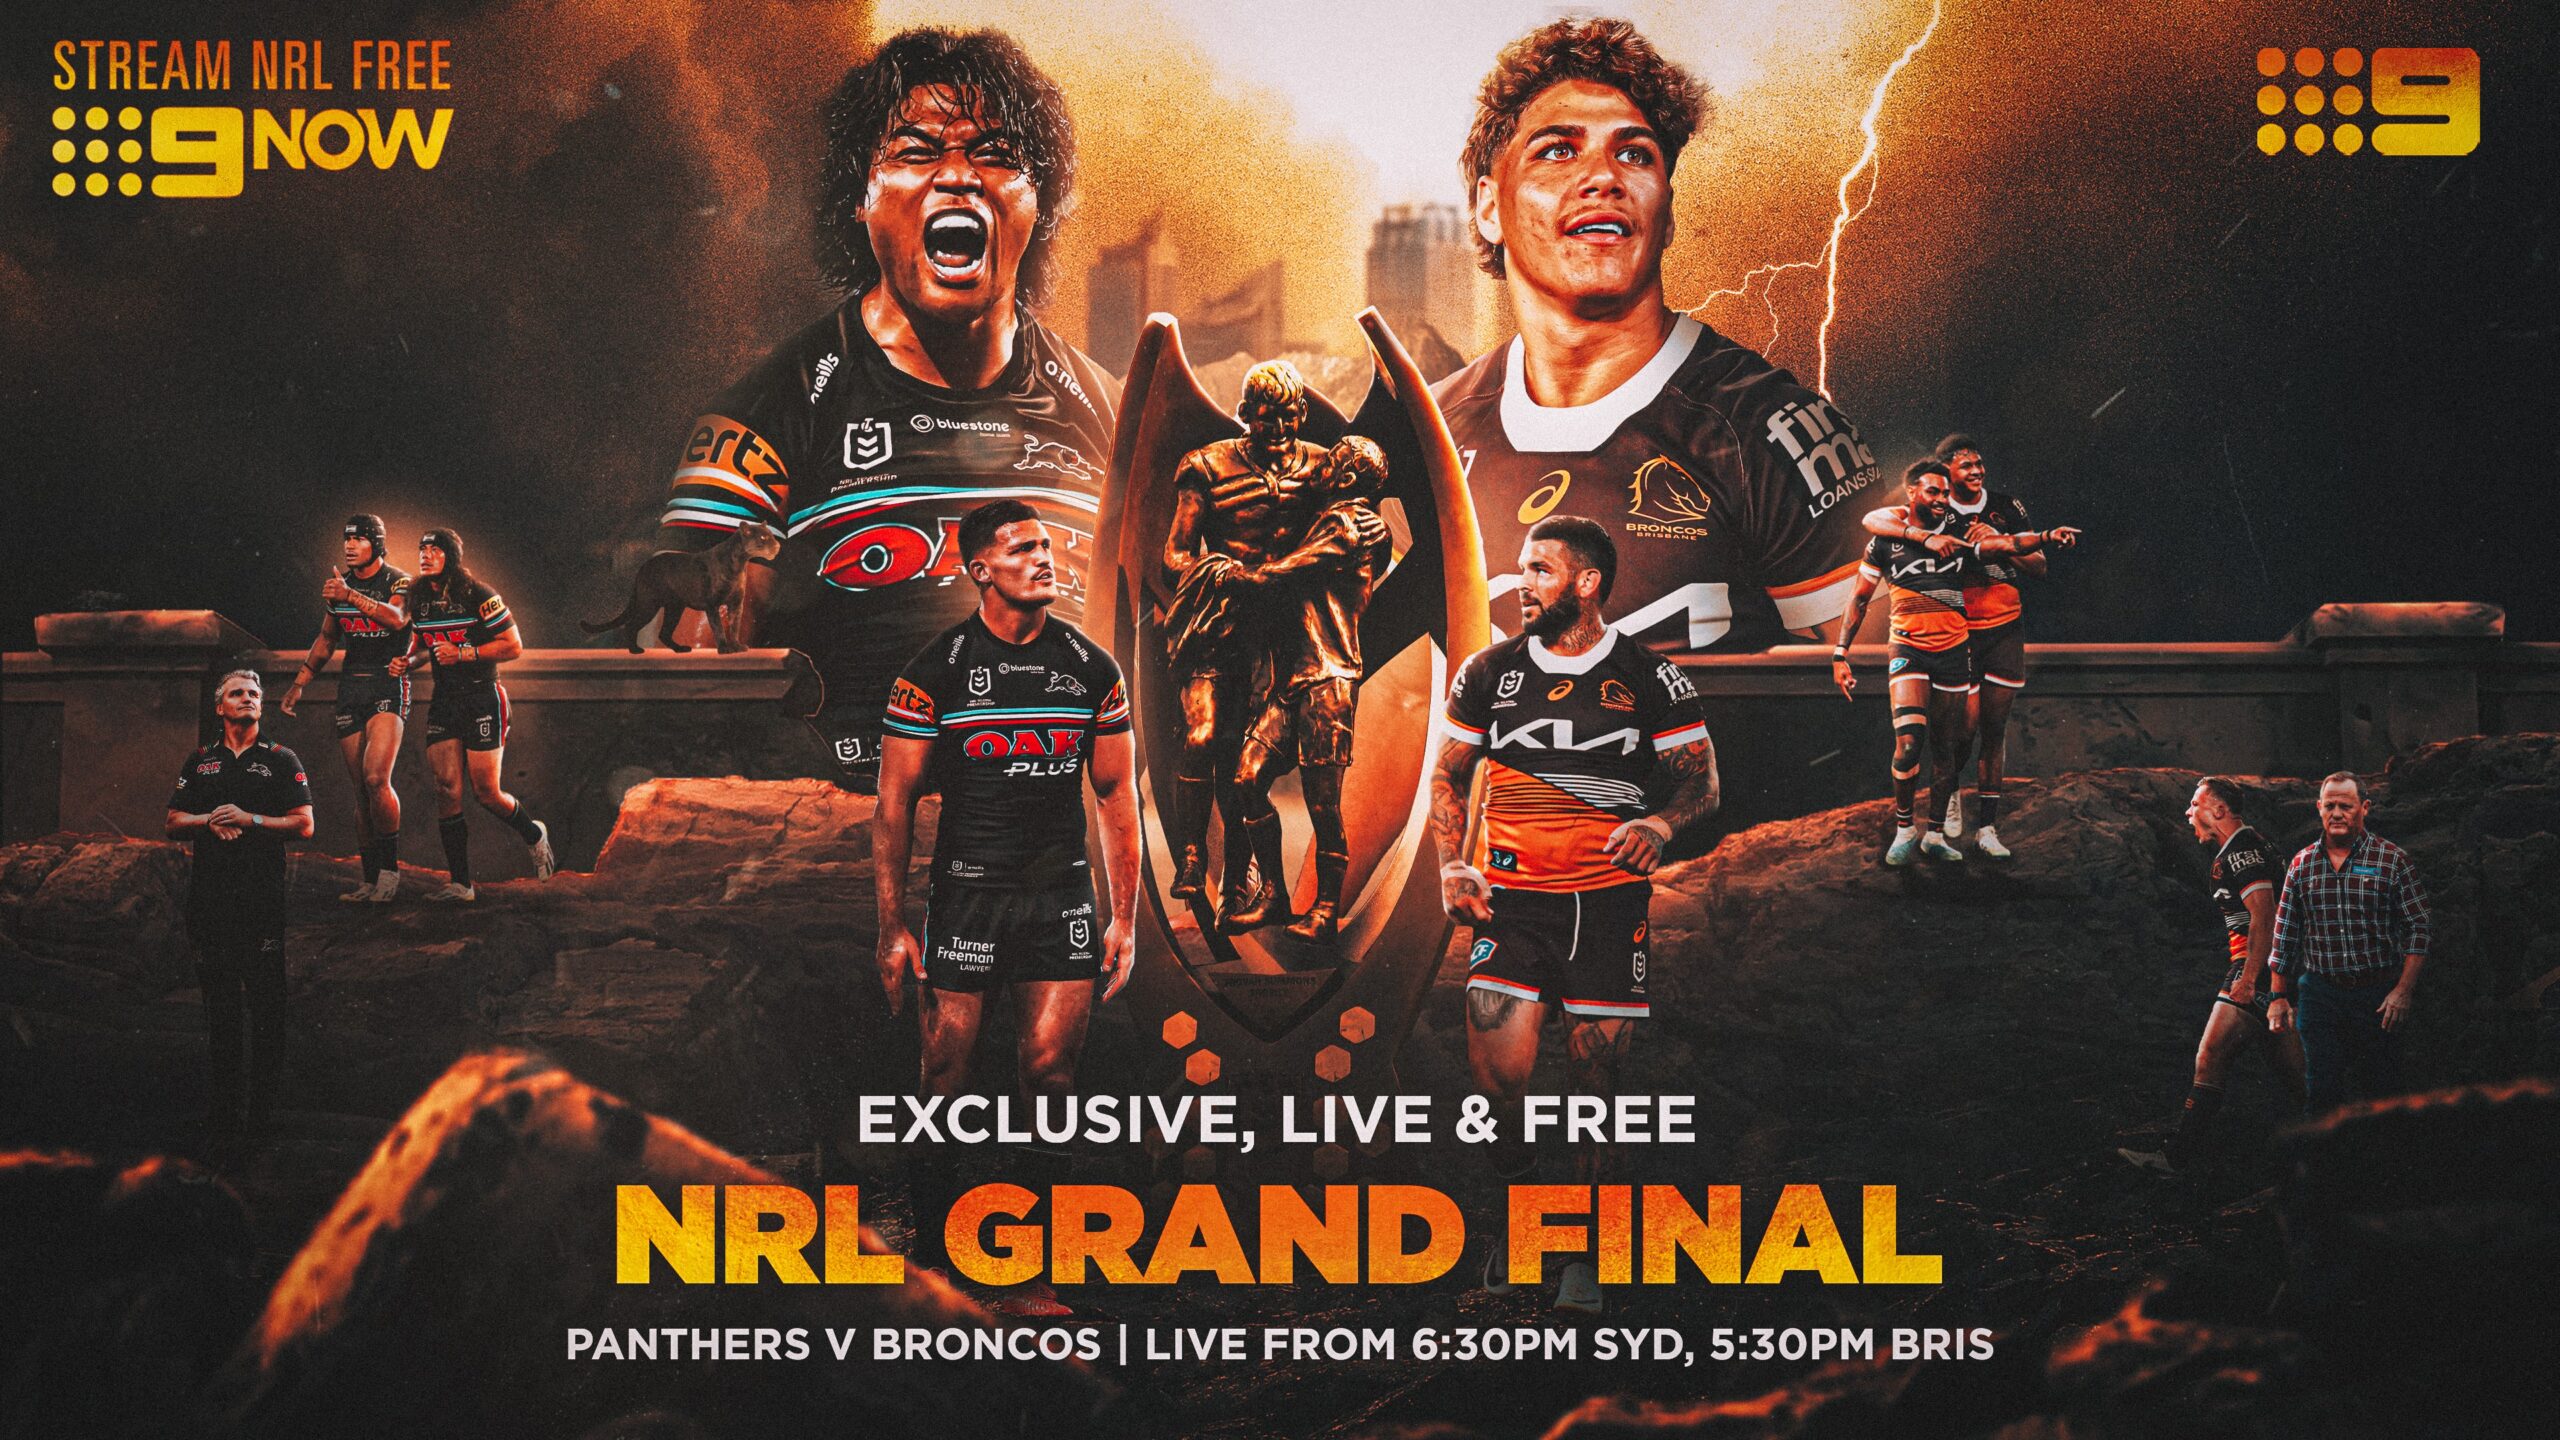 NRL Grand Final on Channel 9